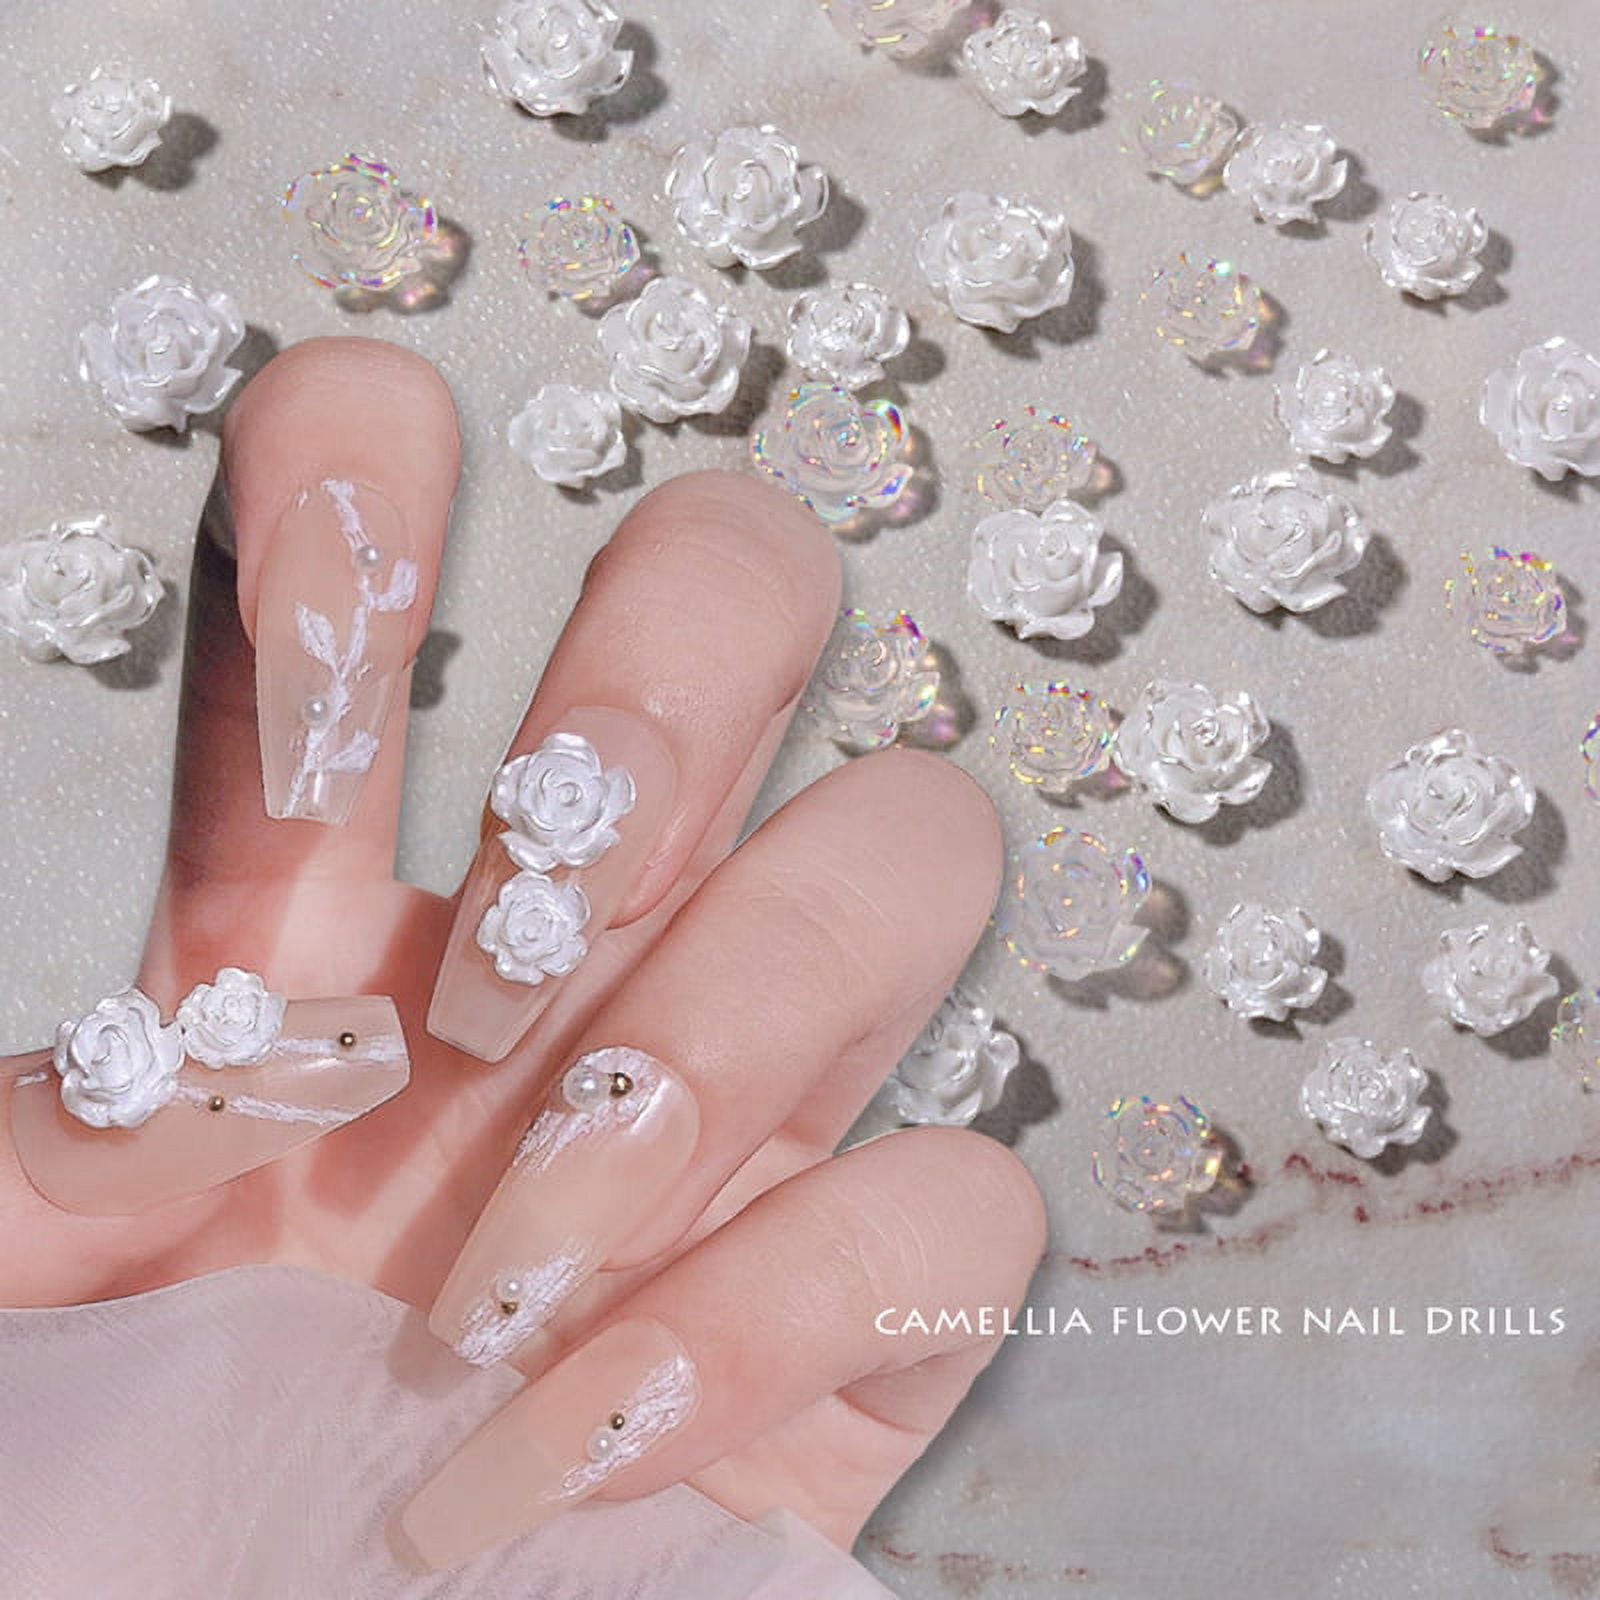 70 Stylish Nail Art Ideas To Try Now : Glitter French Tip Almond Nails